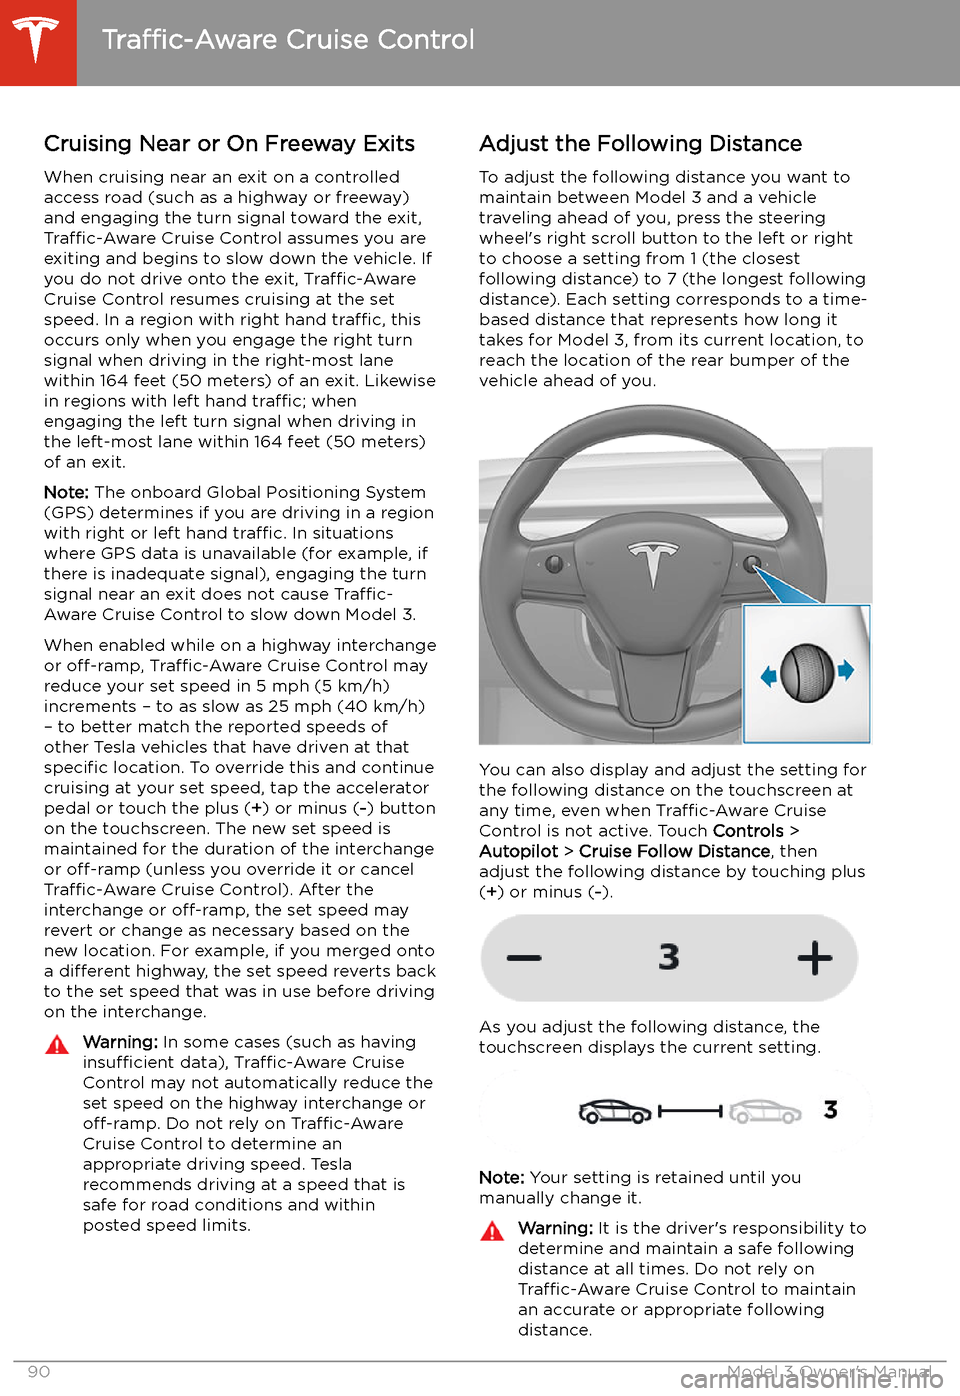 TESLA MODEL 3 2020  Owners Manuals Cruising Near or On Freeway Exits
When cruising near an exit on a controlled
access road (such as a highway or freeway)
and engaging the turn signal toward the exit,
Traffic-Aware  Cruise Control assu